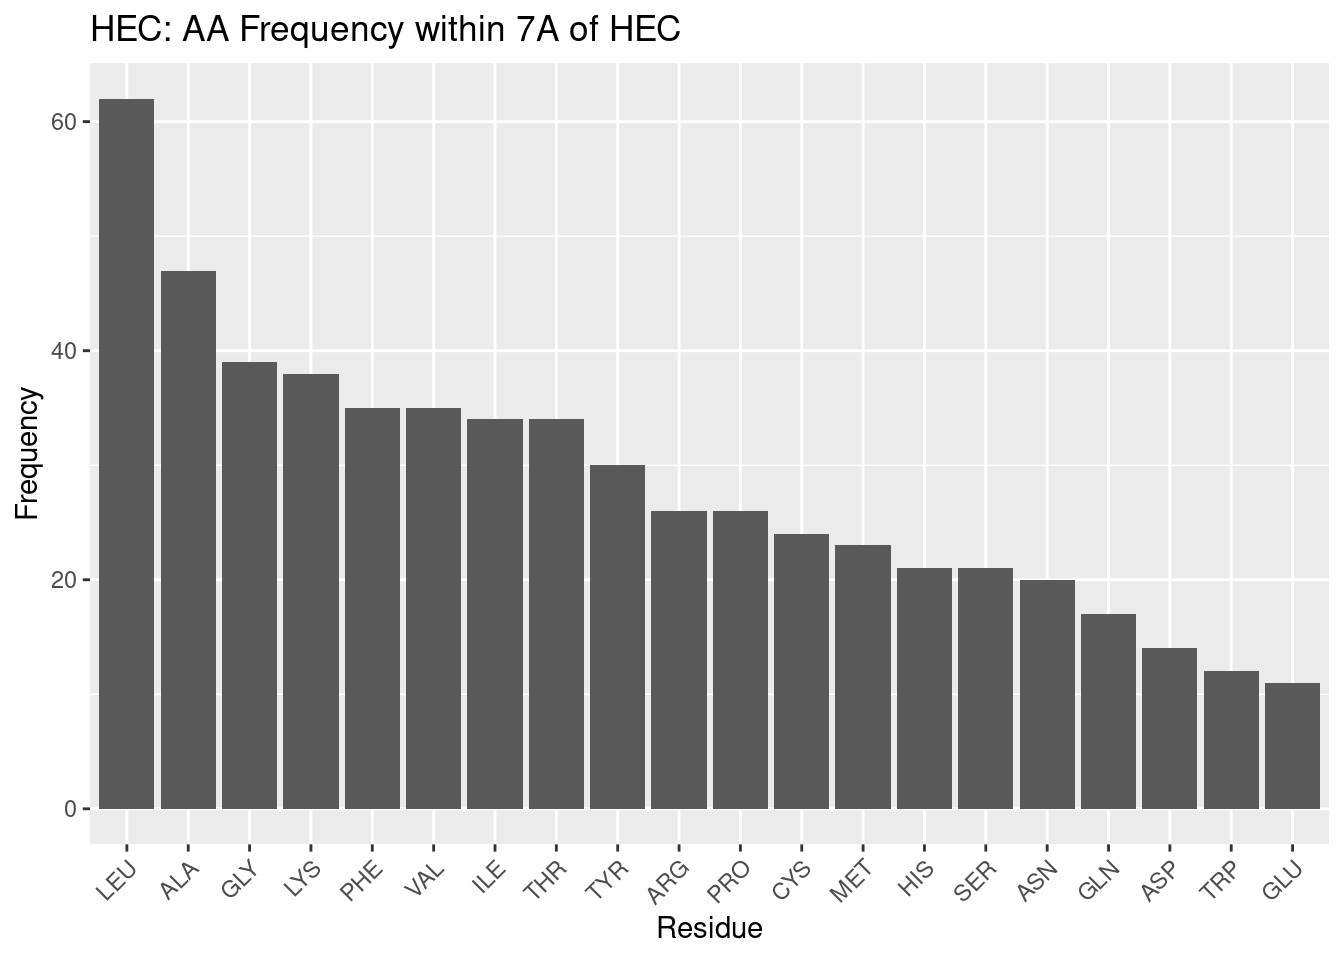 HEC: AA Frequency within 7A